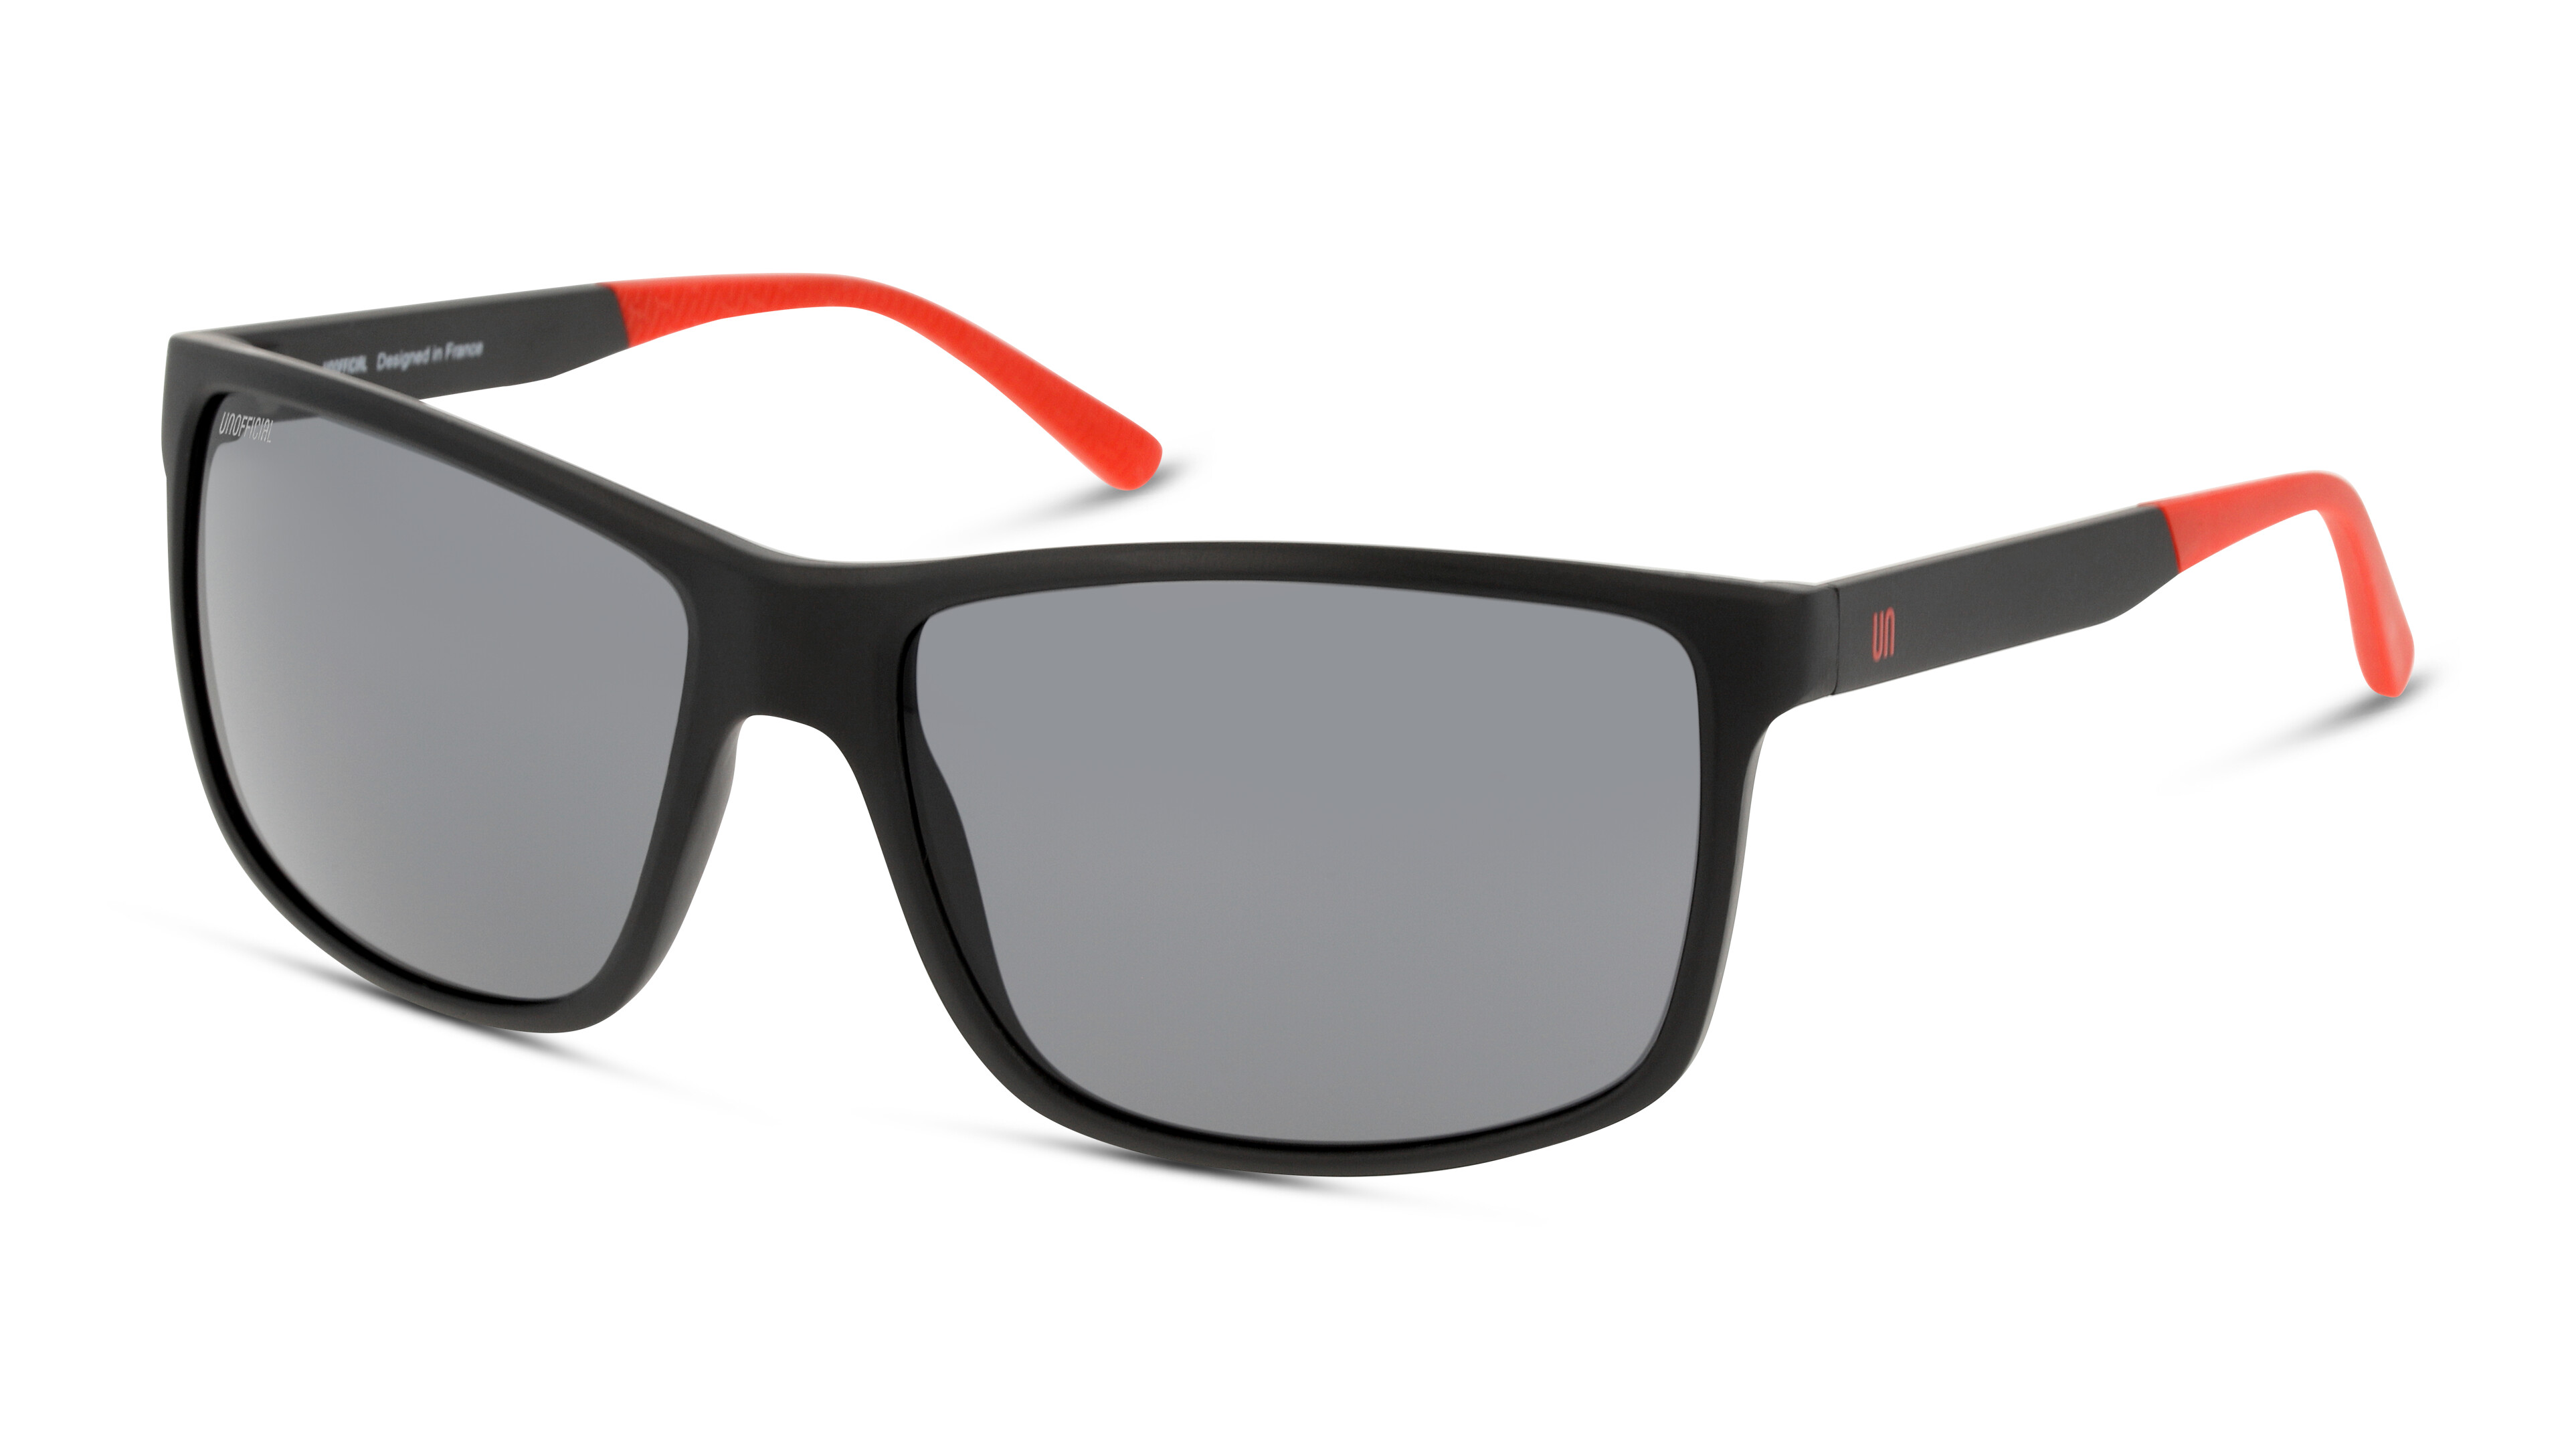 [products.image.angle_left01] UNOFFICIAL UNSM0092 BRG0 Sonnenbrille